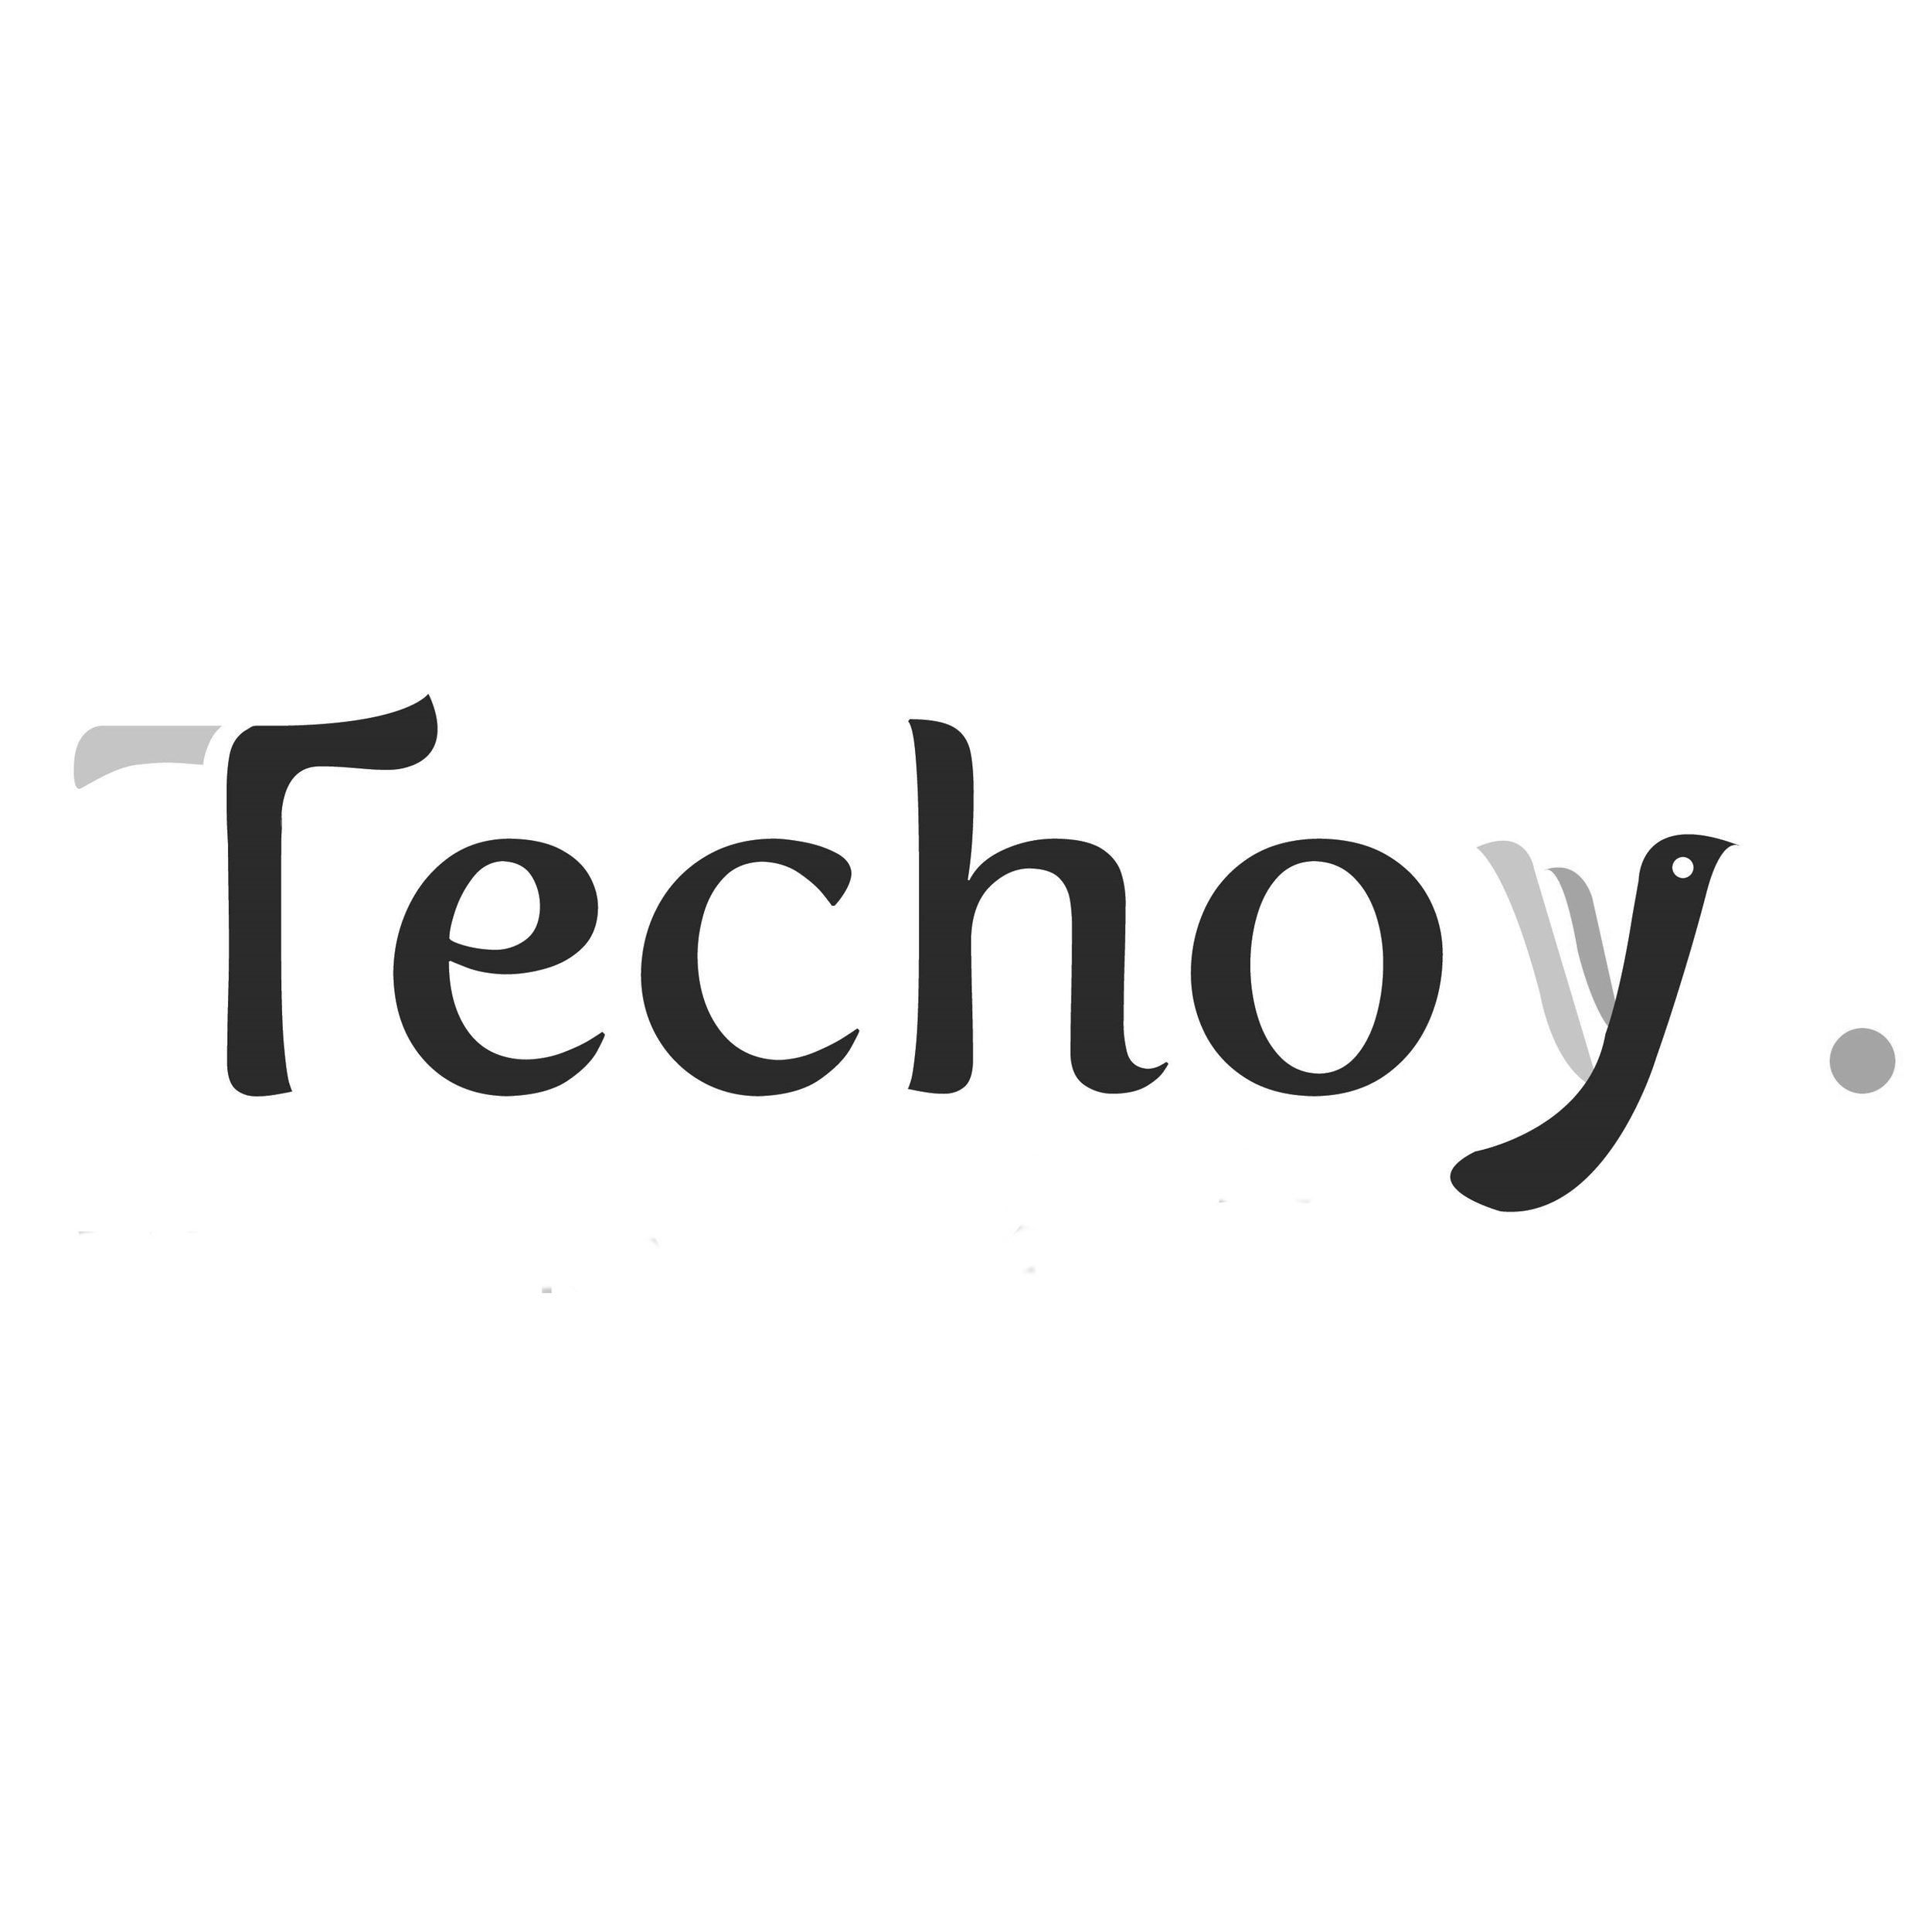 techoy.png